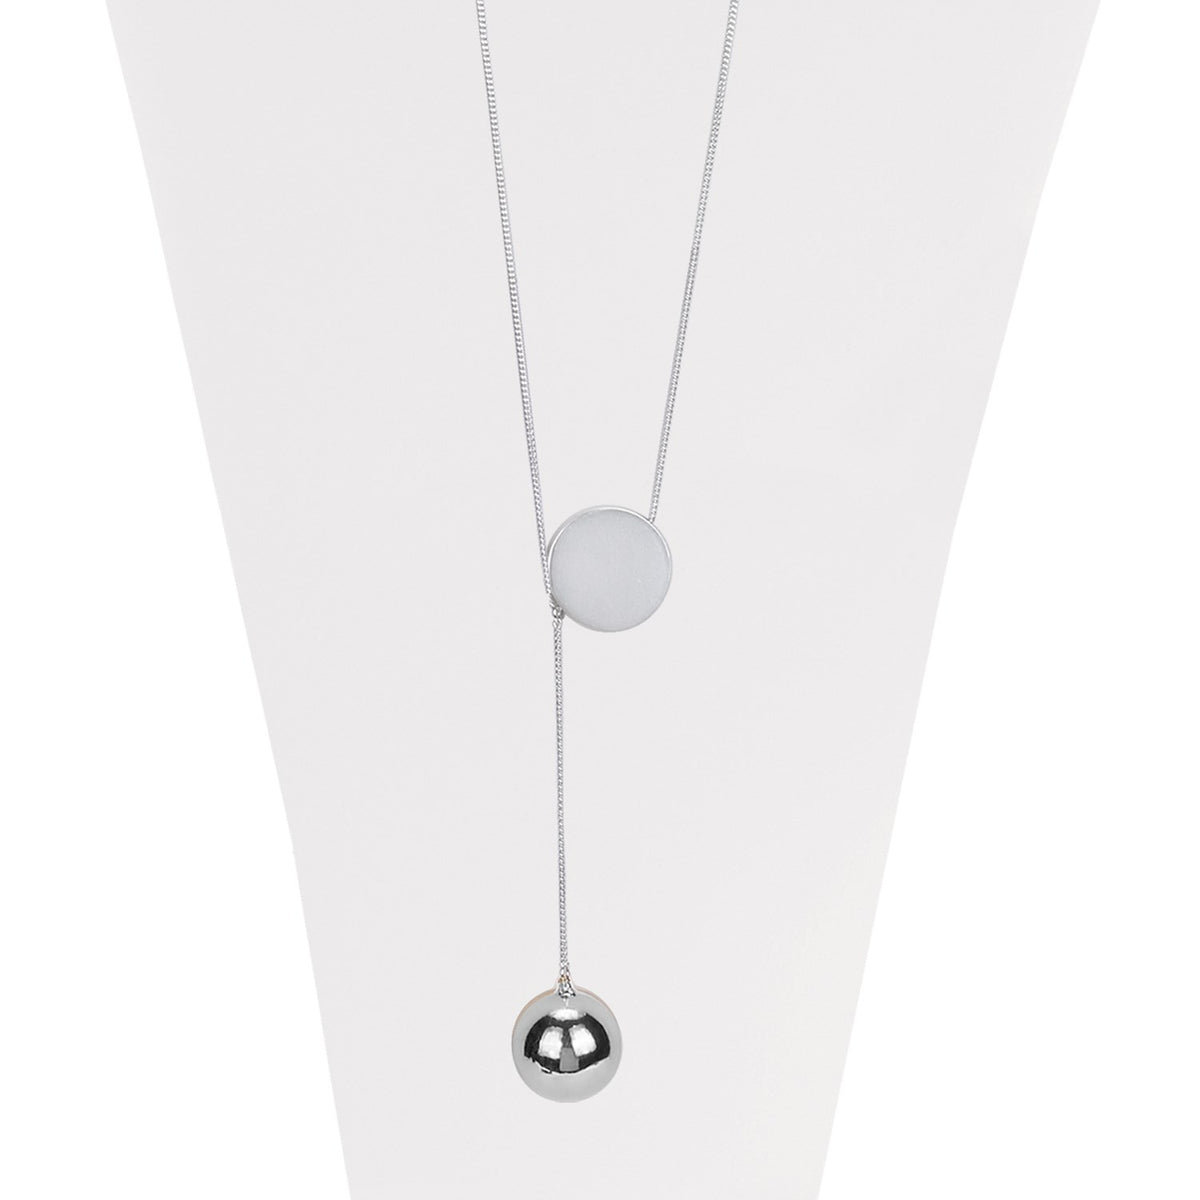 Silver delicate slip on chain necklace with metallic sphere pendant